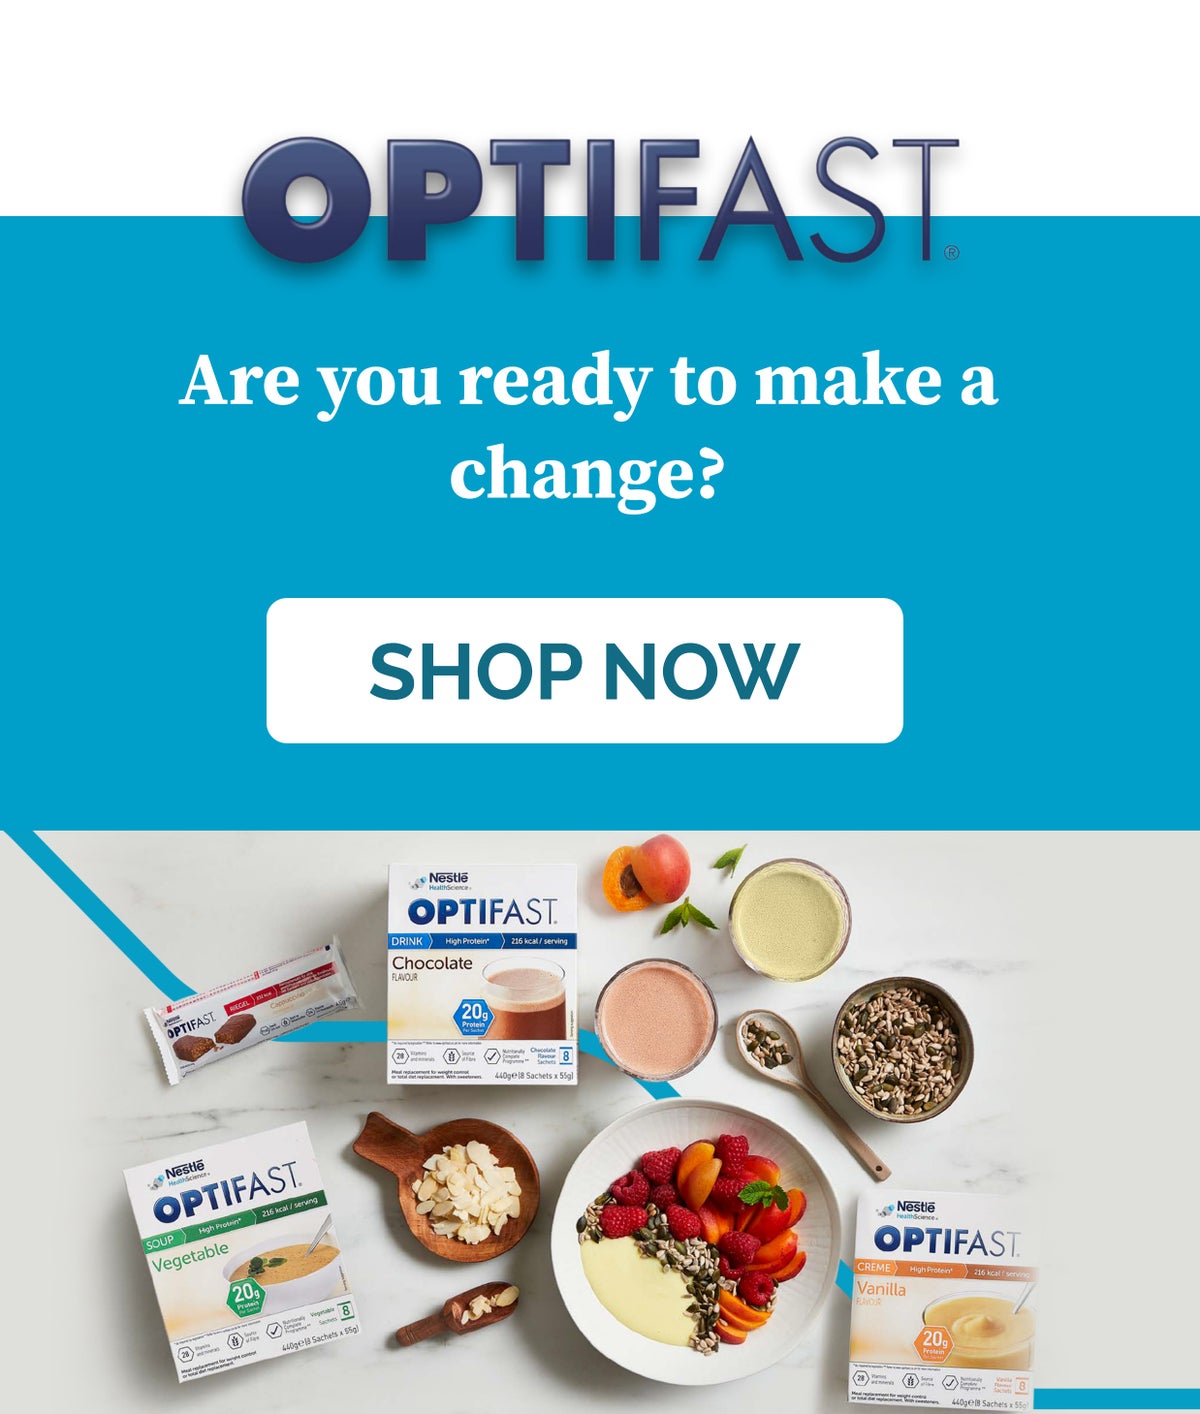 Optifast - .Are you ready to make a change? Shop Now